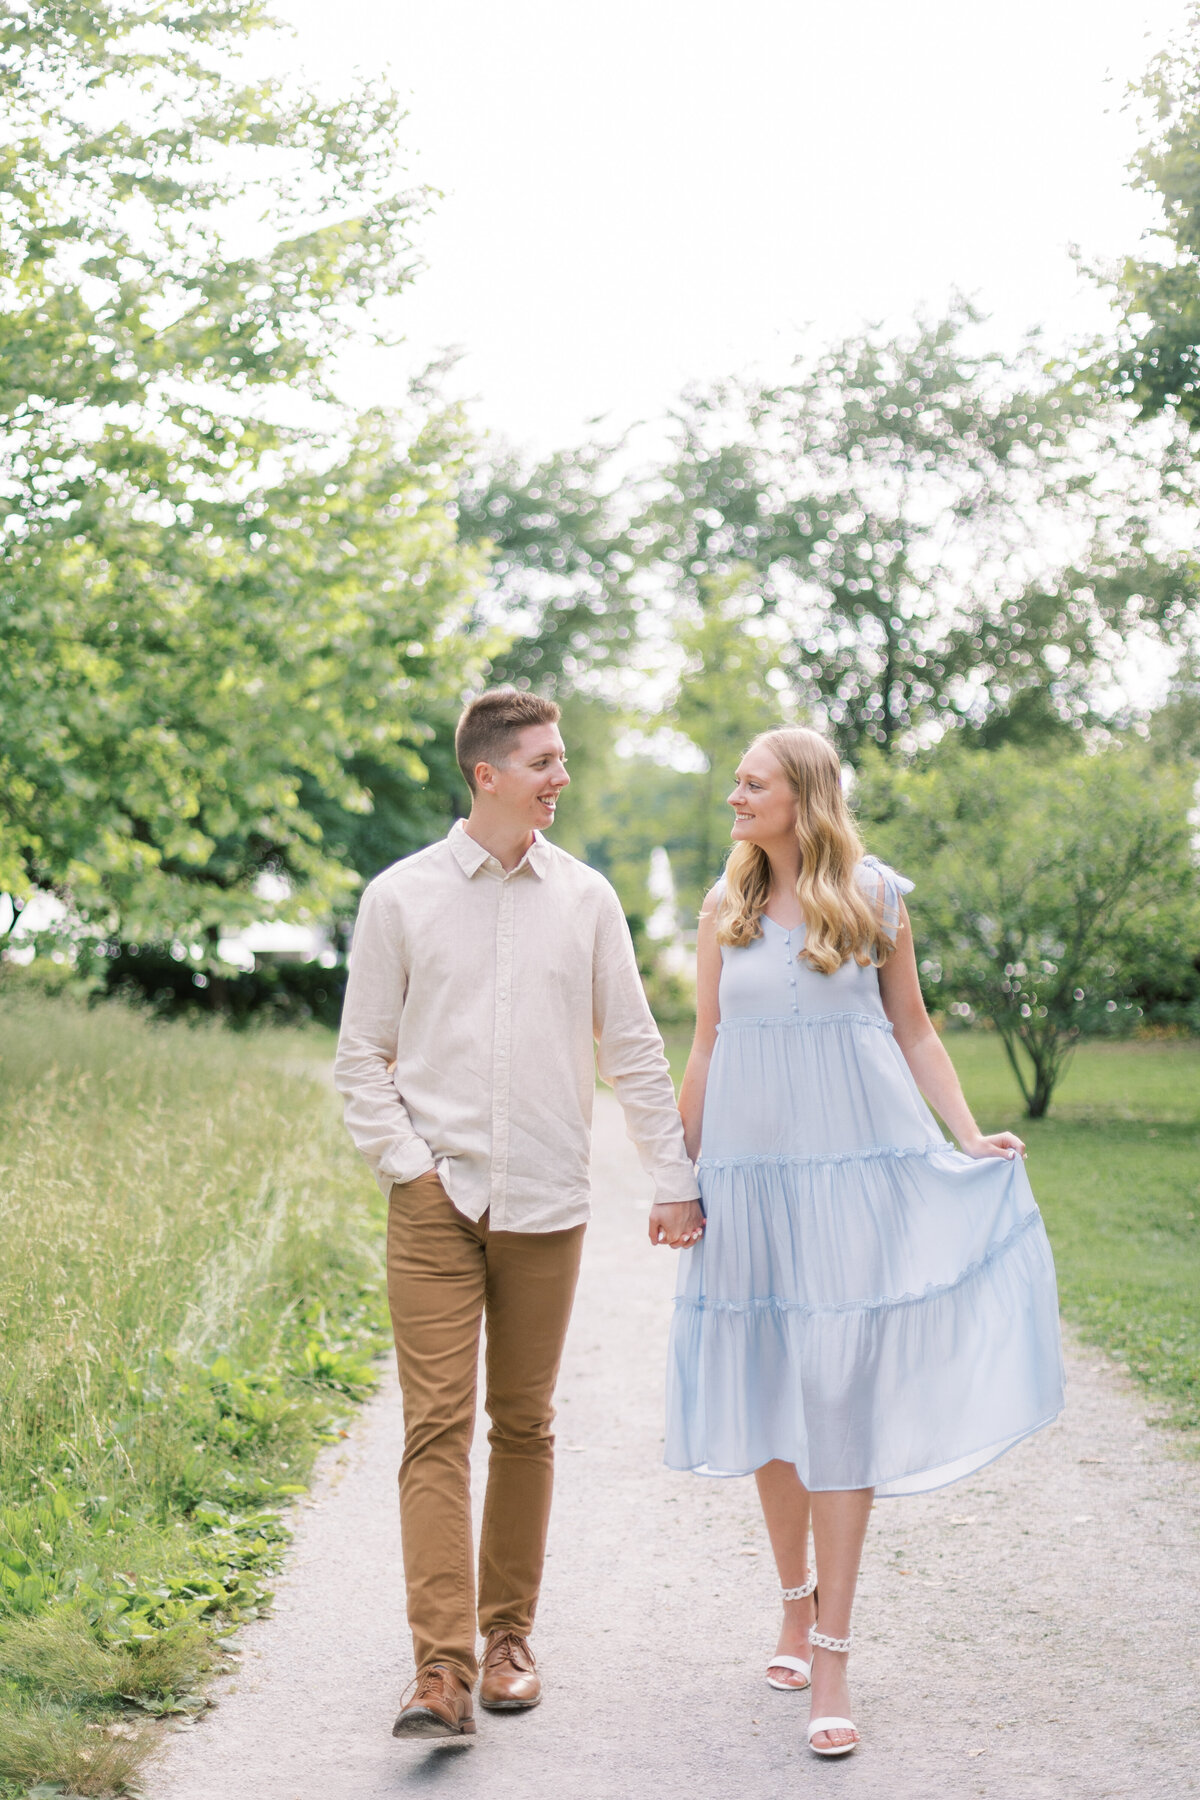 amber-rhea-photography-midwest-wedding-photographer-stl-engagement210A4783